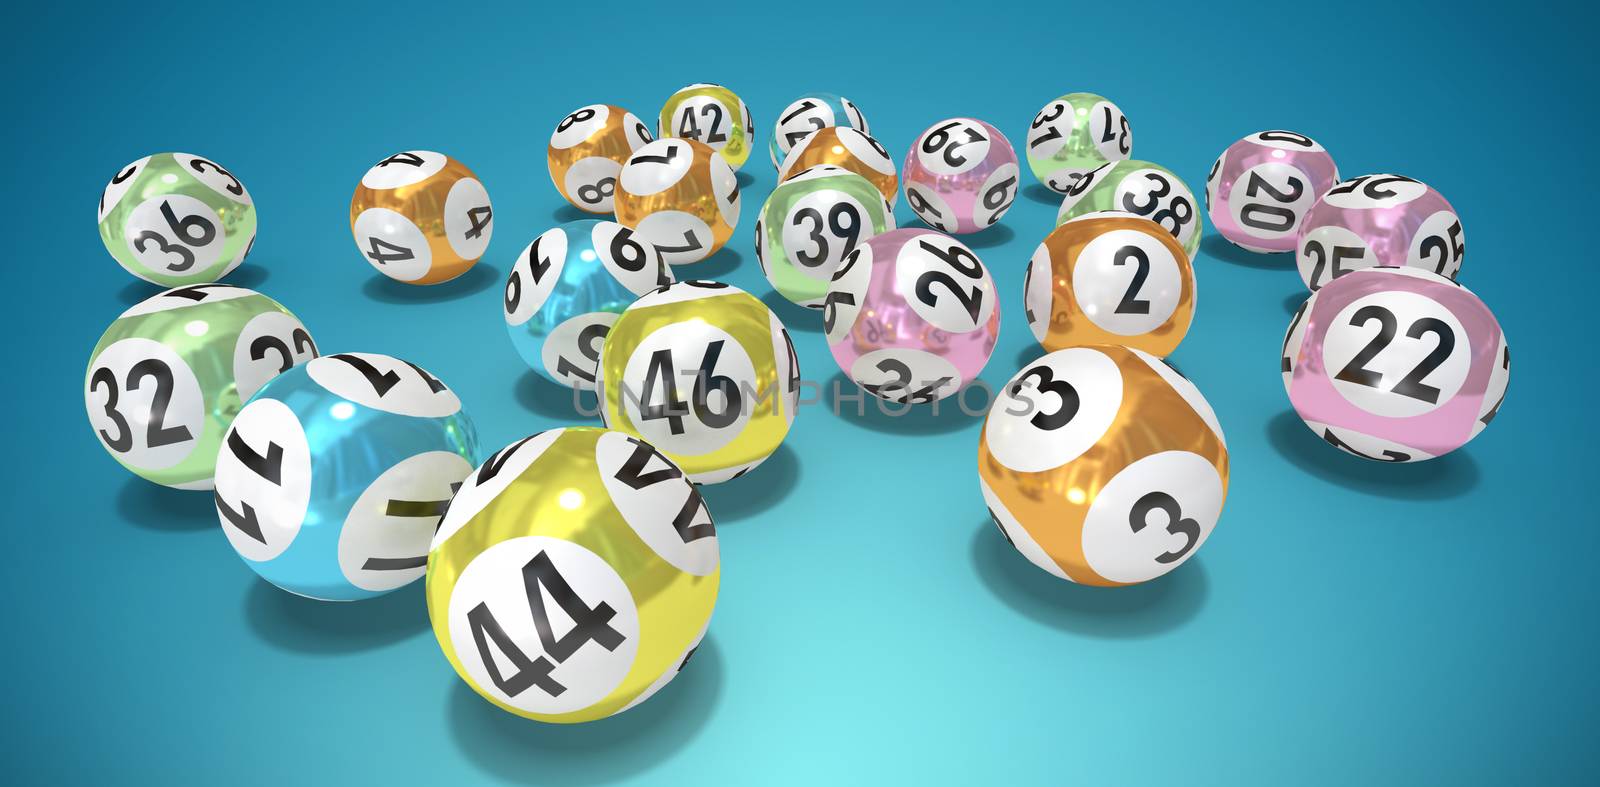 Composite image of lottery balls with numbers by Wavebreakmedia